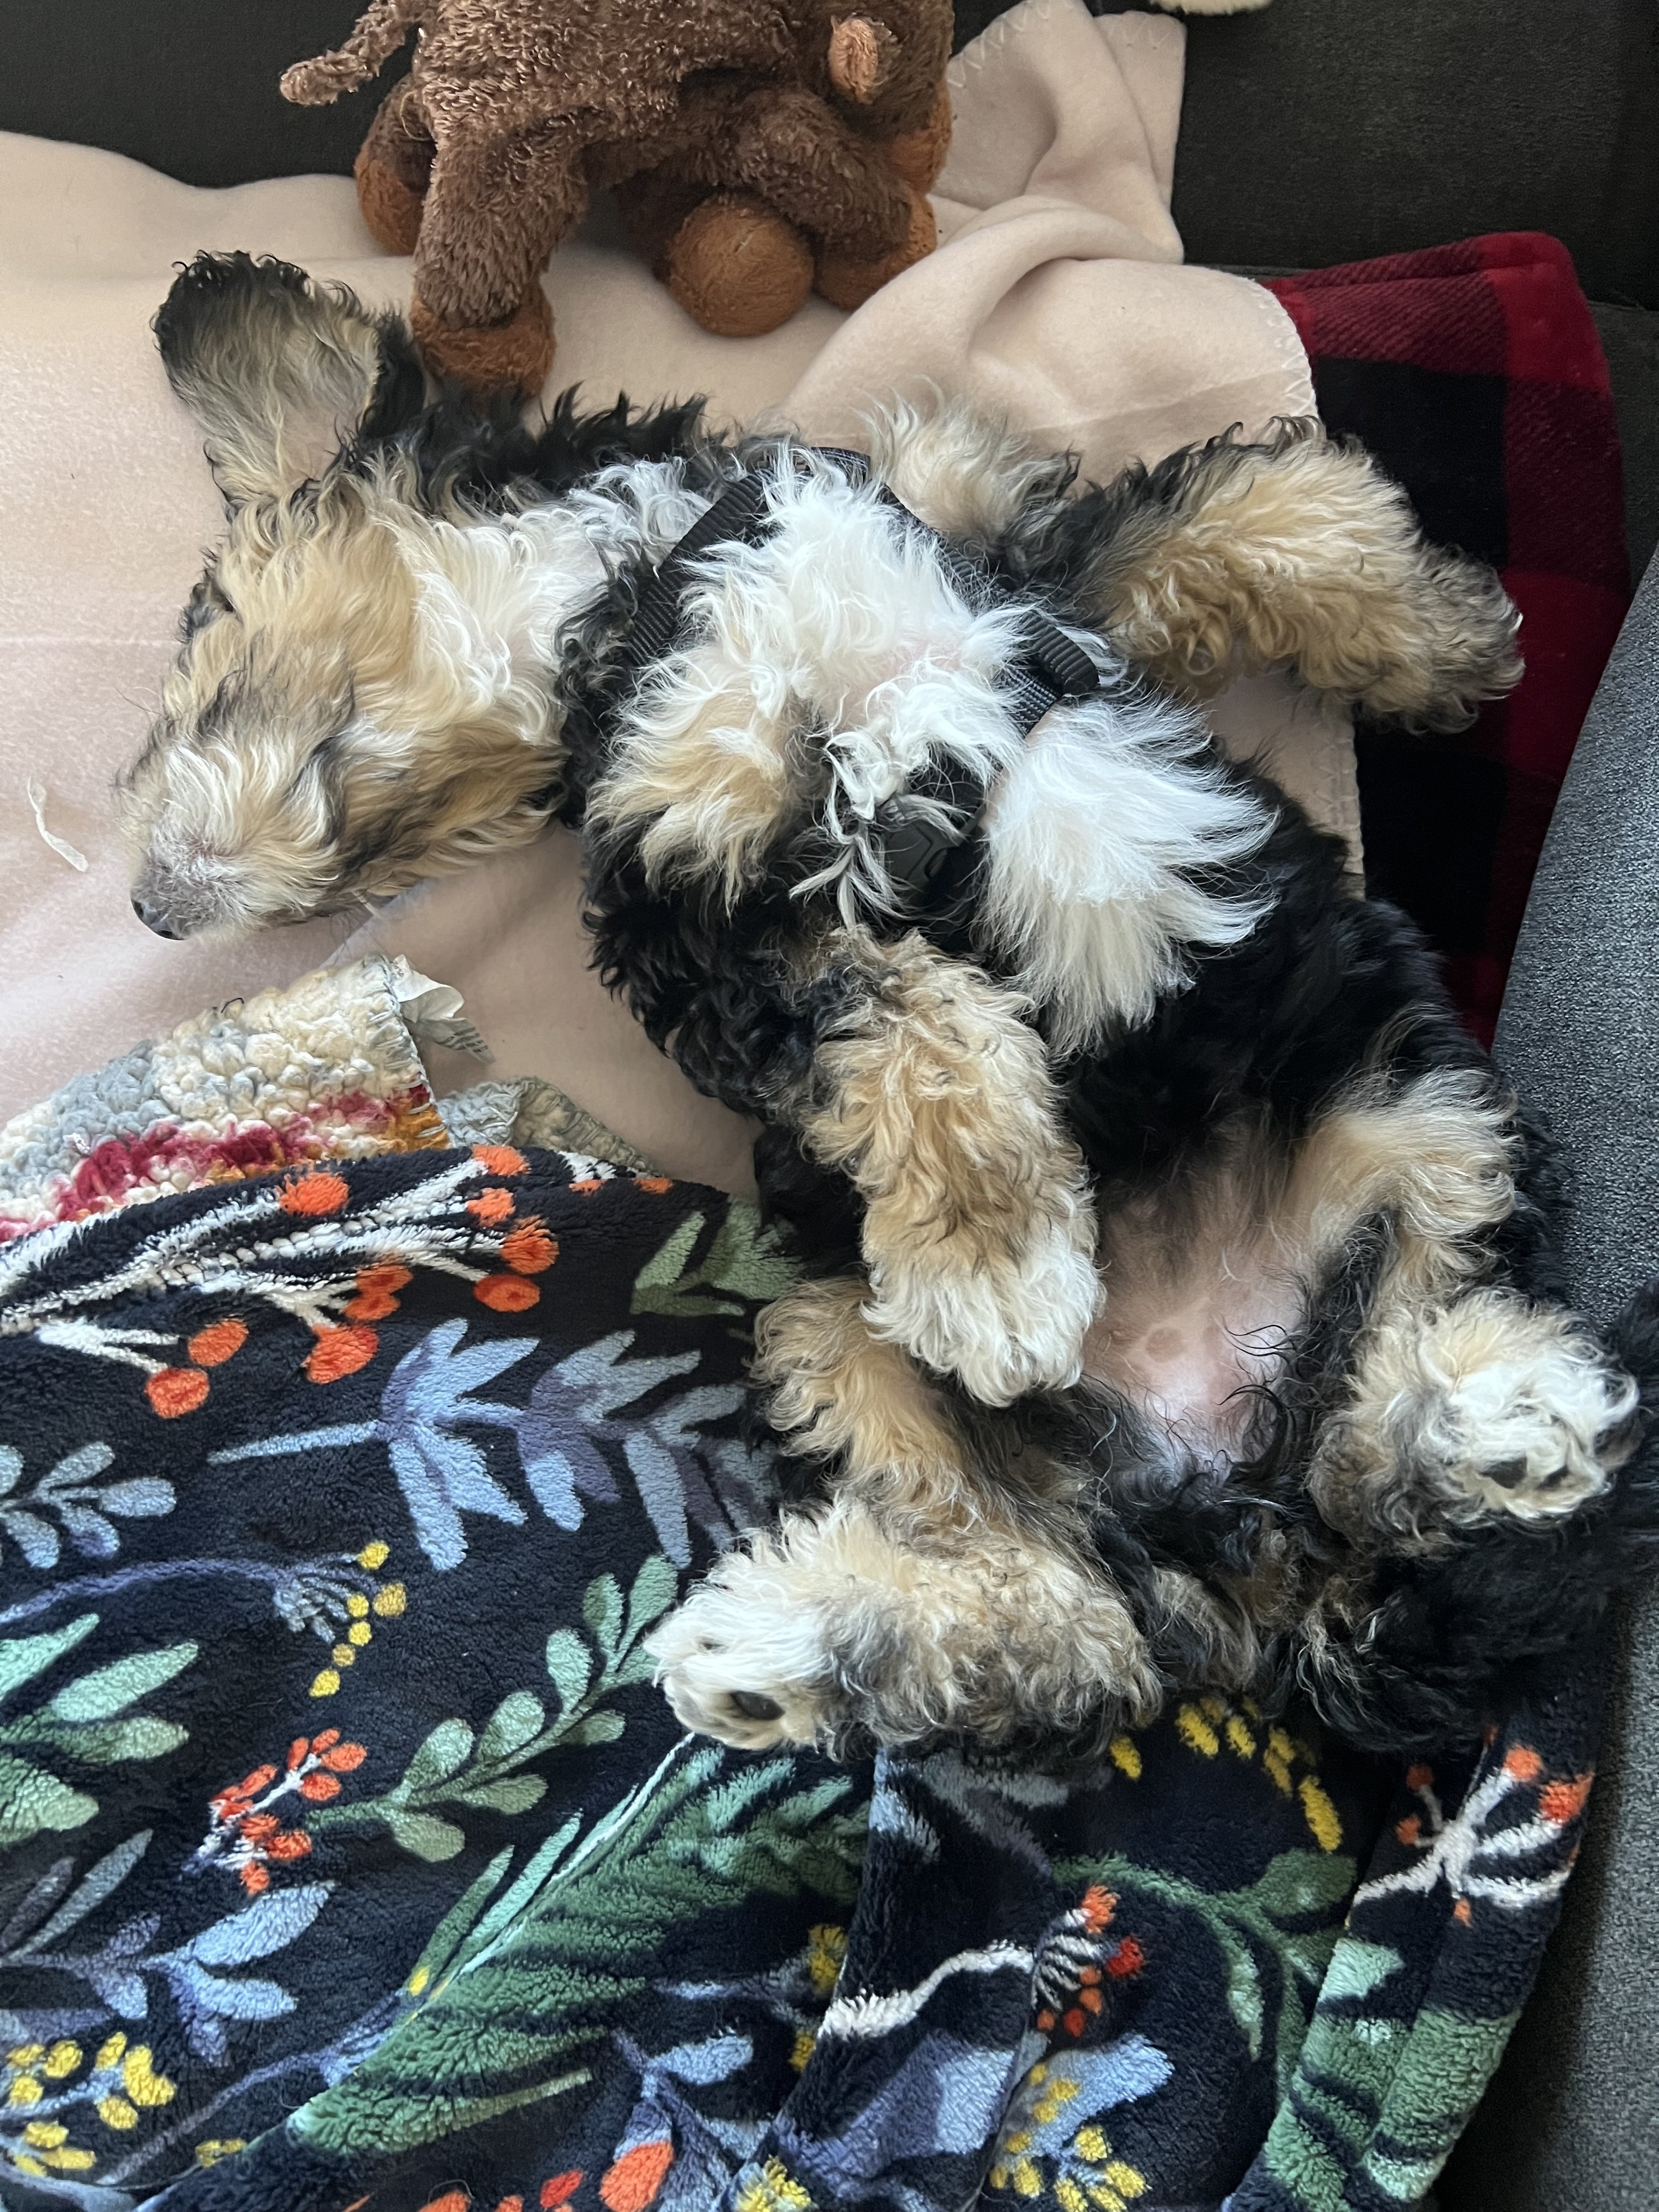 small, curly-haired puppy sleeps on its back, belly toward the sky